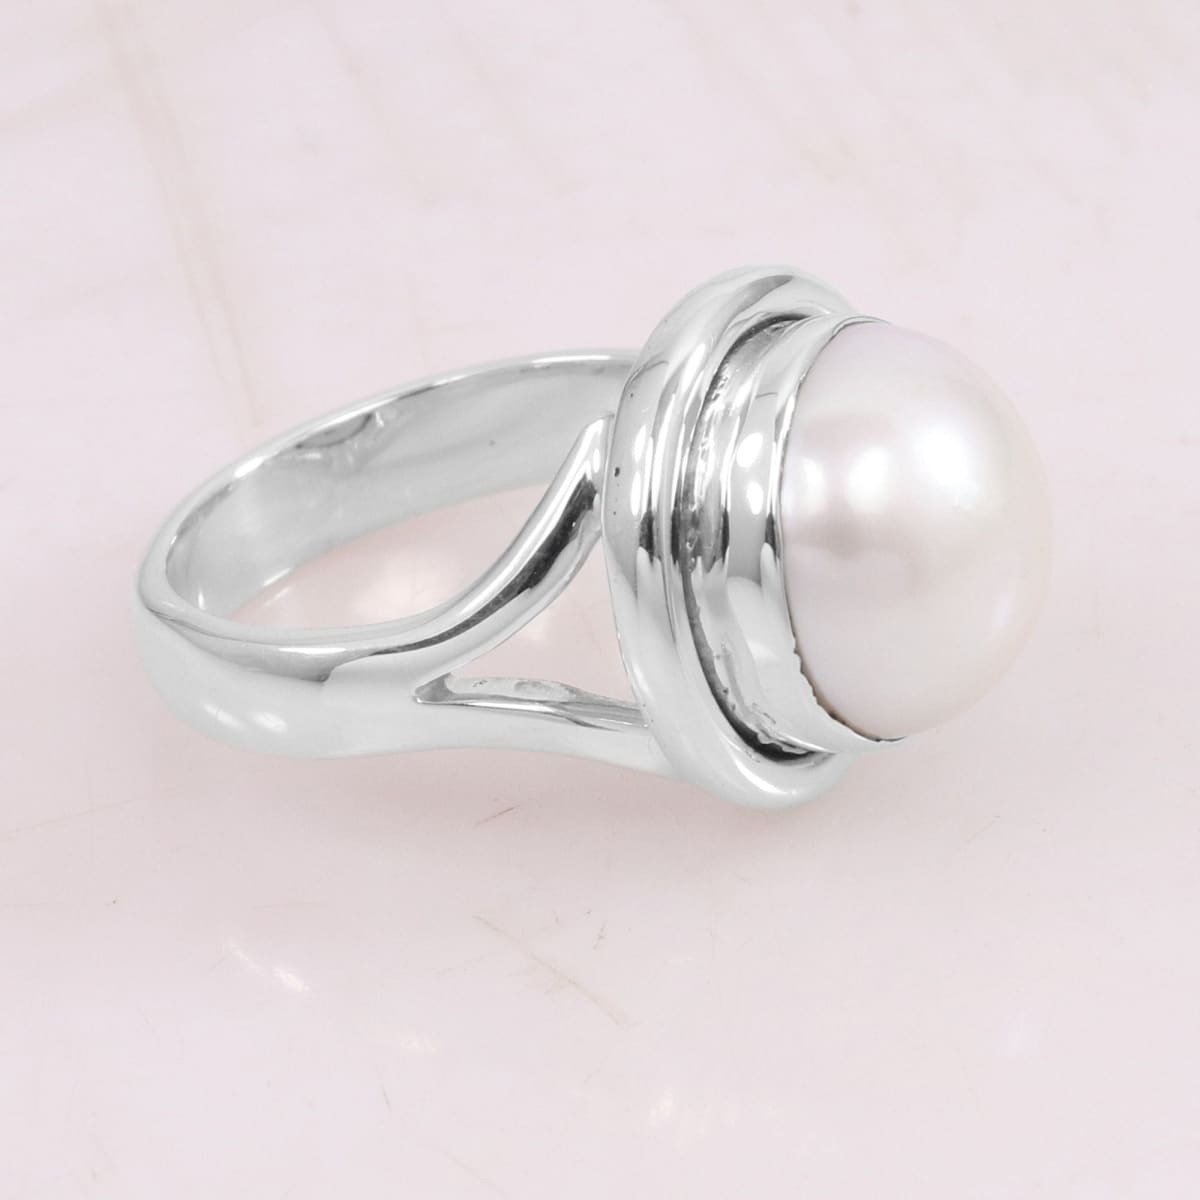 Pearl Ring in 925 Sterling Silver, Freshwater Pearl, Sea Stone, Silver Ring,  Designer Ring, Birthstone Ring, Healing Stone Ring, Gift Her - Etsy